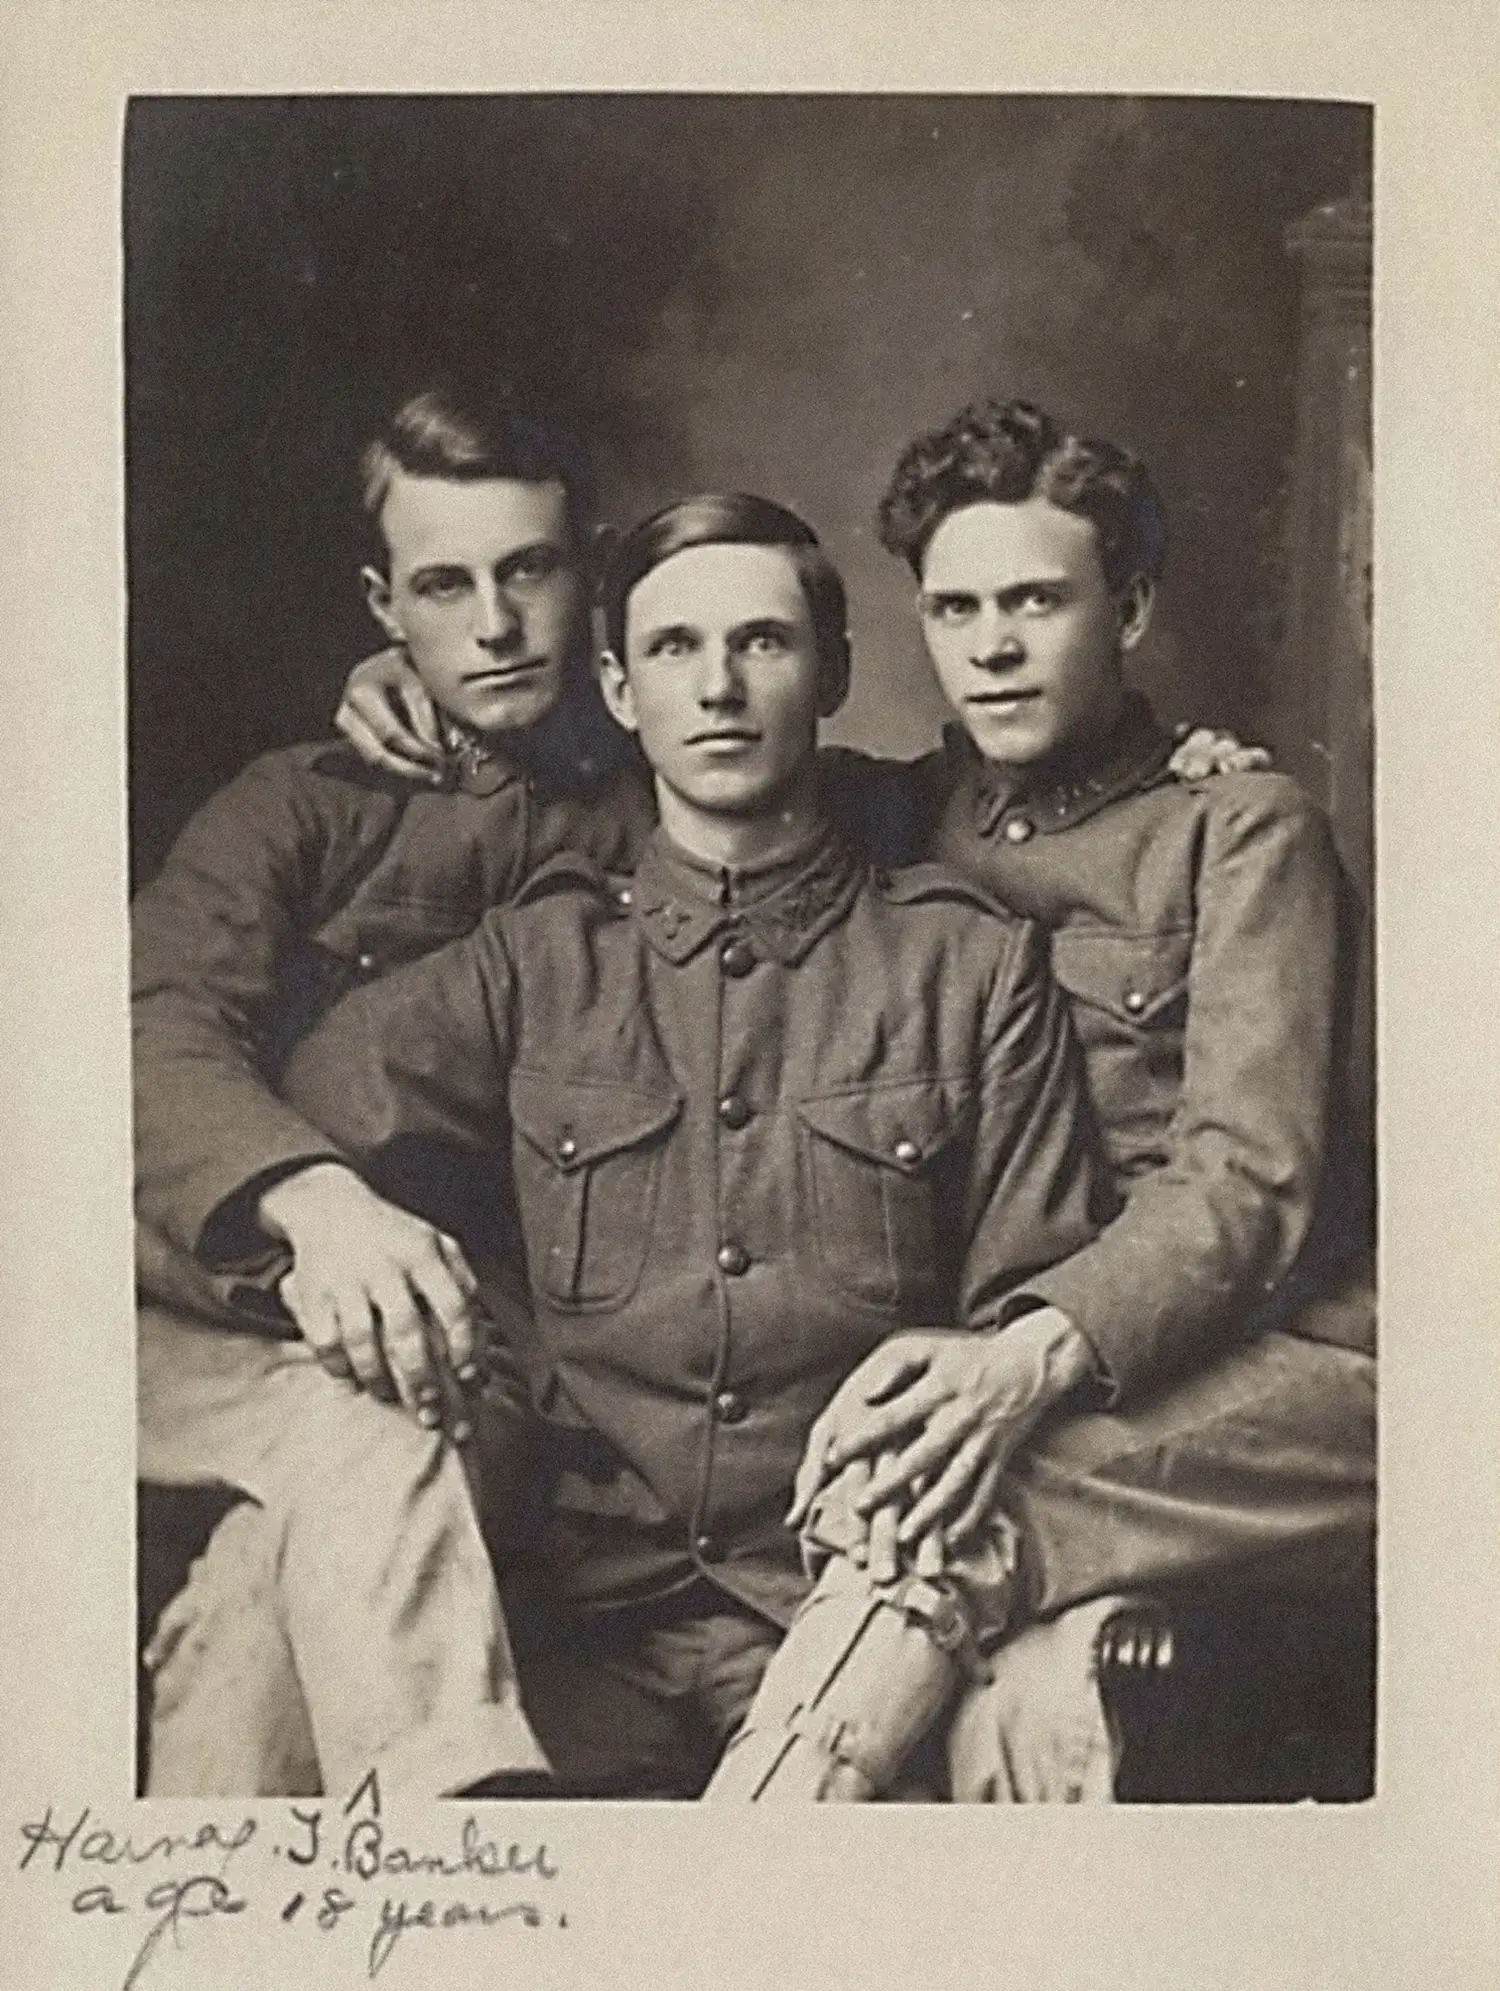 Three young men in WW1-era military uniform are seated together in an embrace. The man in the center is holding the hands of the two men seated on each side, and the outer two men each have a hand draped around the other’s shoulder.